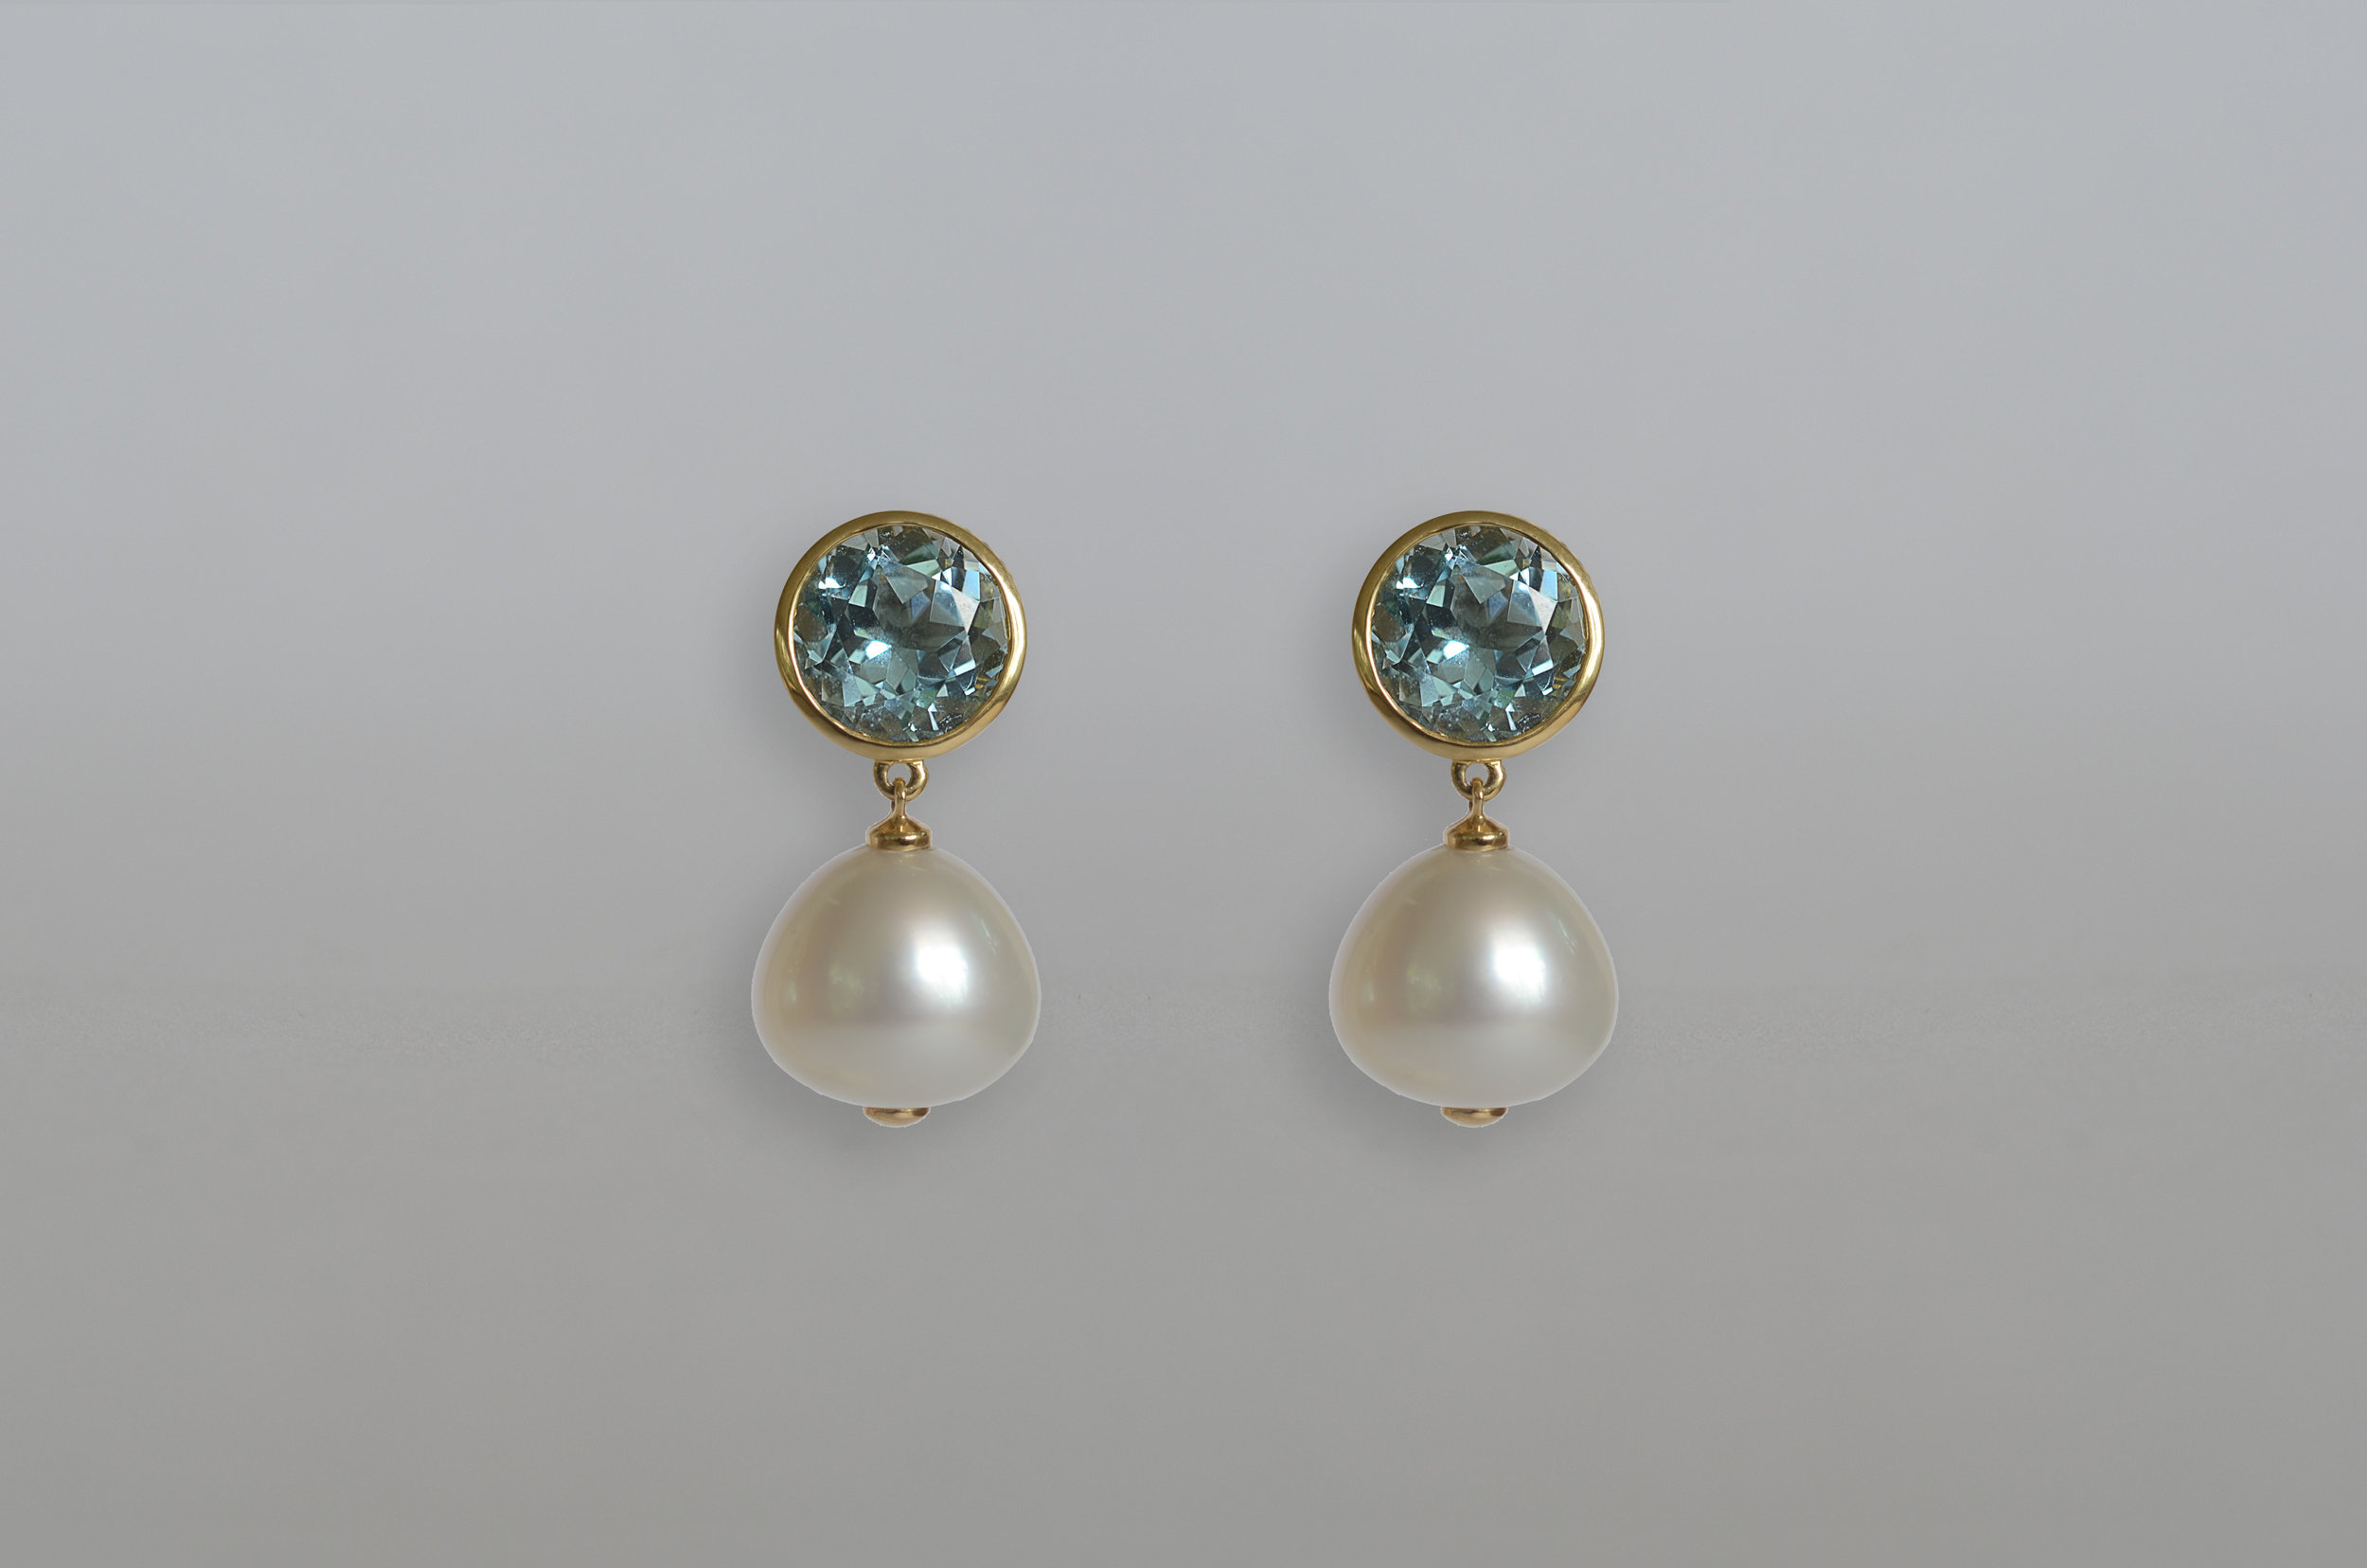 Pearl and Blue Earrings with gradient.jpg